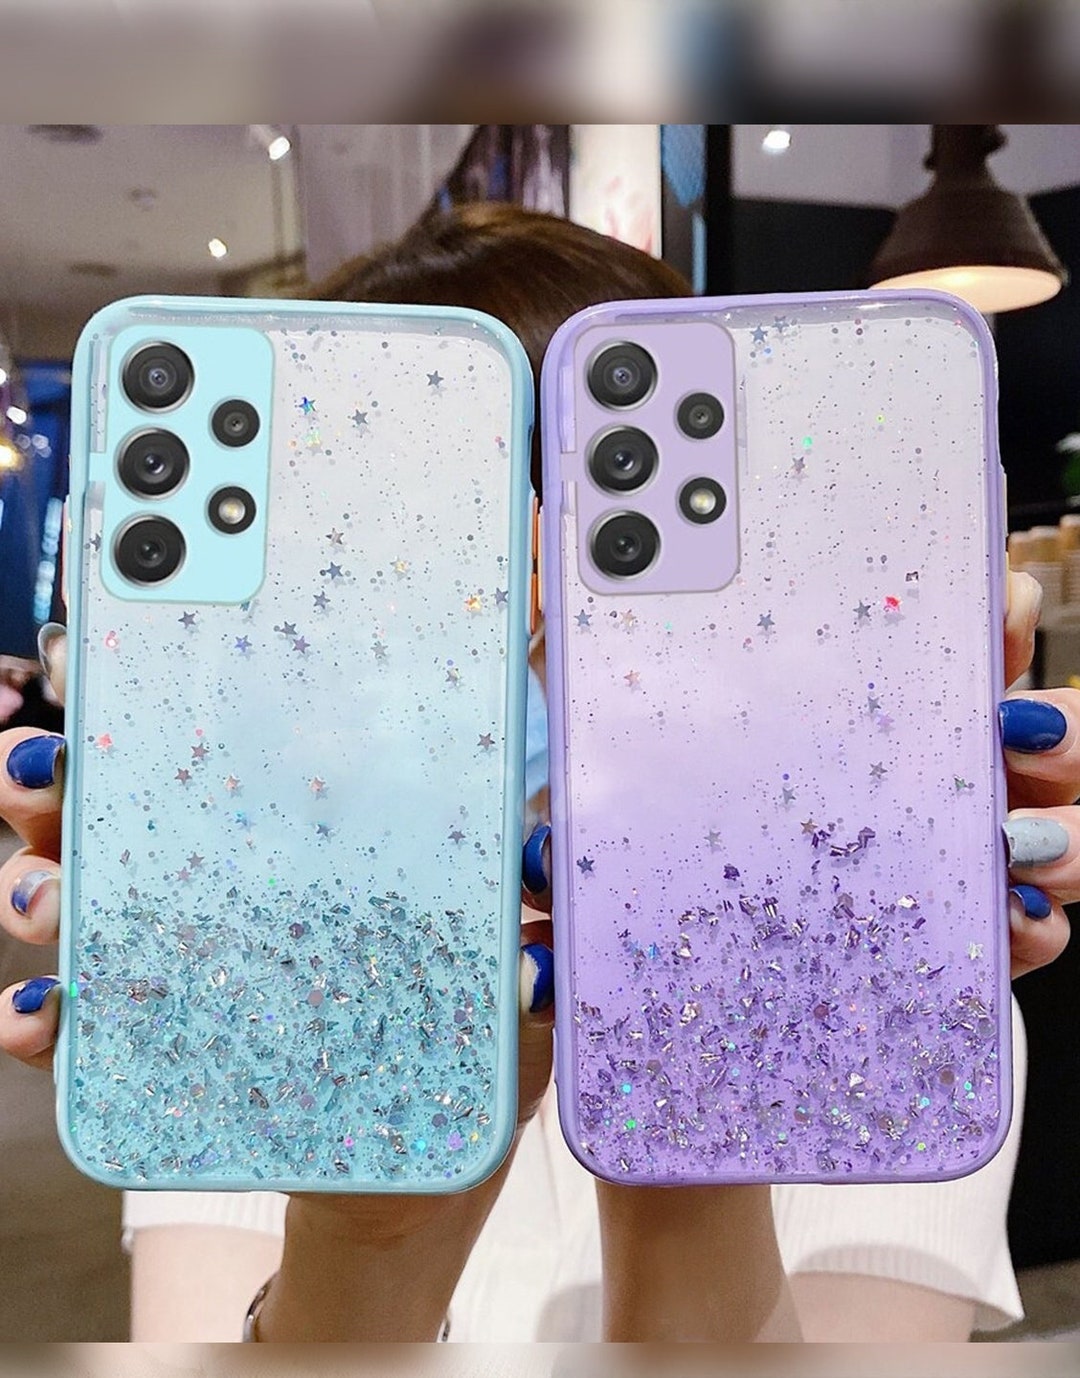 Fashion Luxury Square High Quality S Glitter Phone Case For iPhone